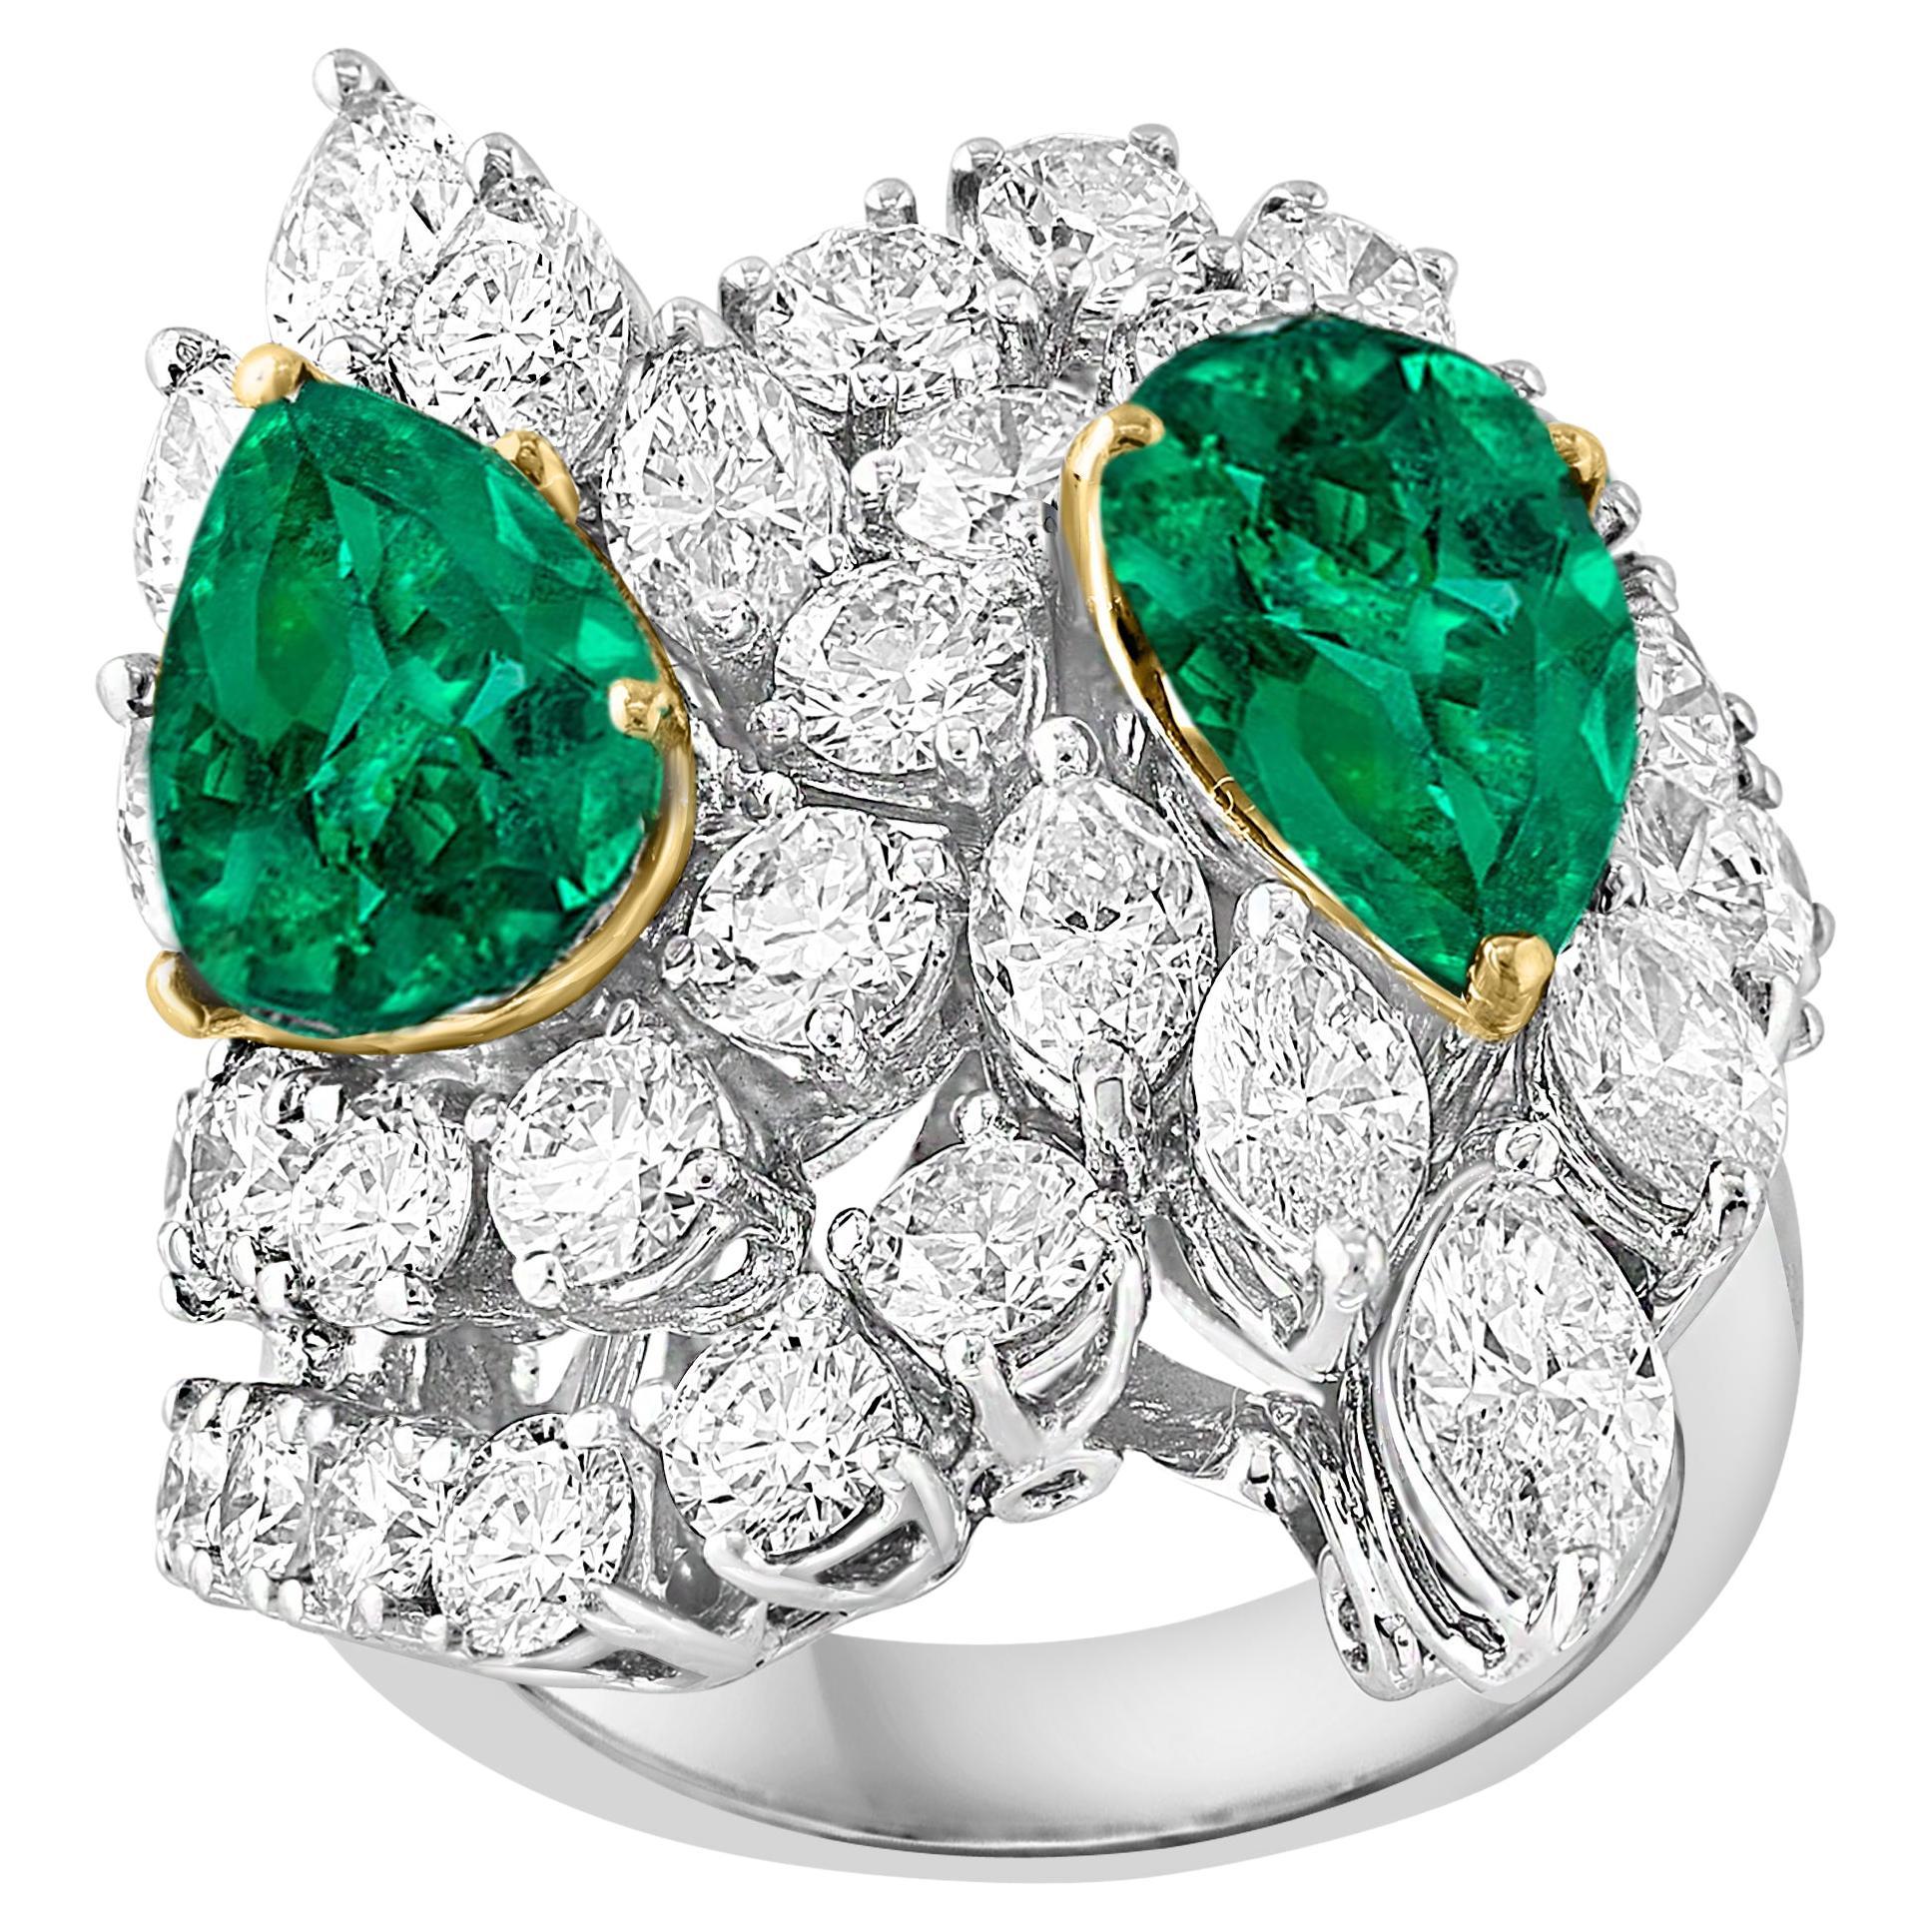 Two Pear shape 5.5 Ct Emerald  & 8.5 Ct Diamond Ring,  18K White Gold Size 6